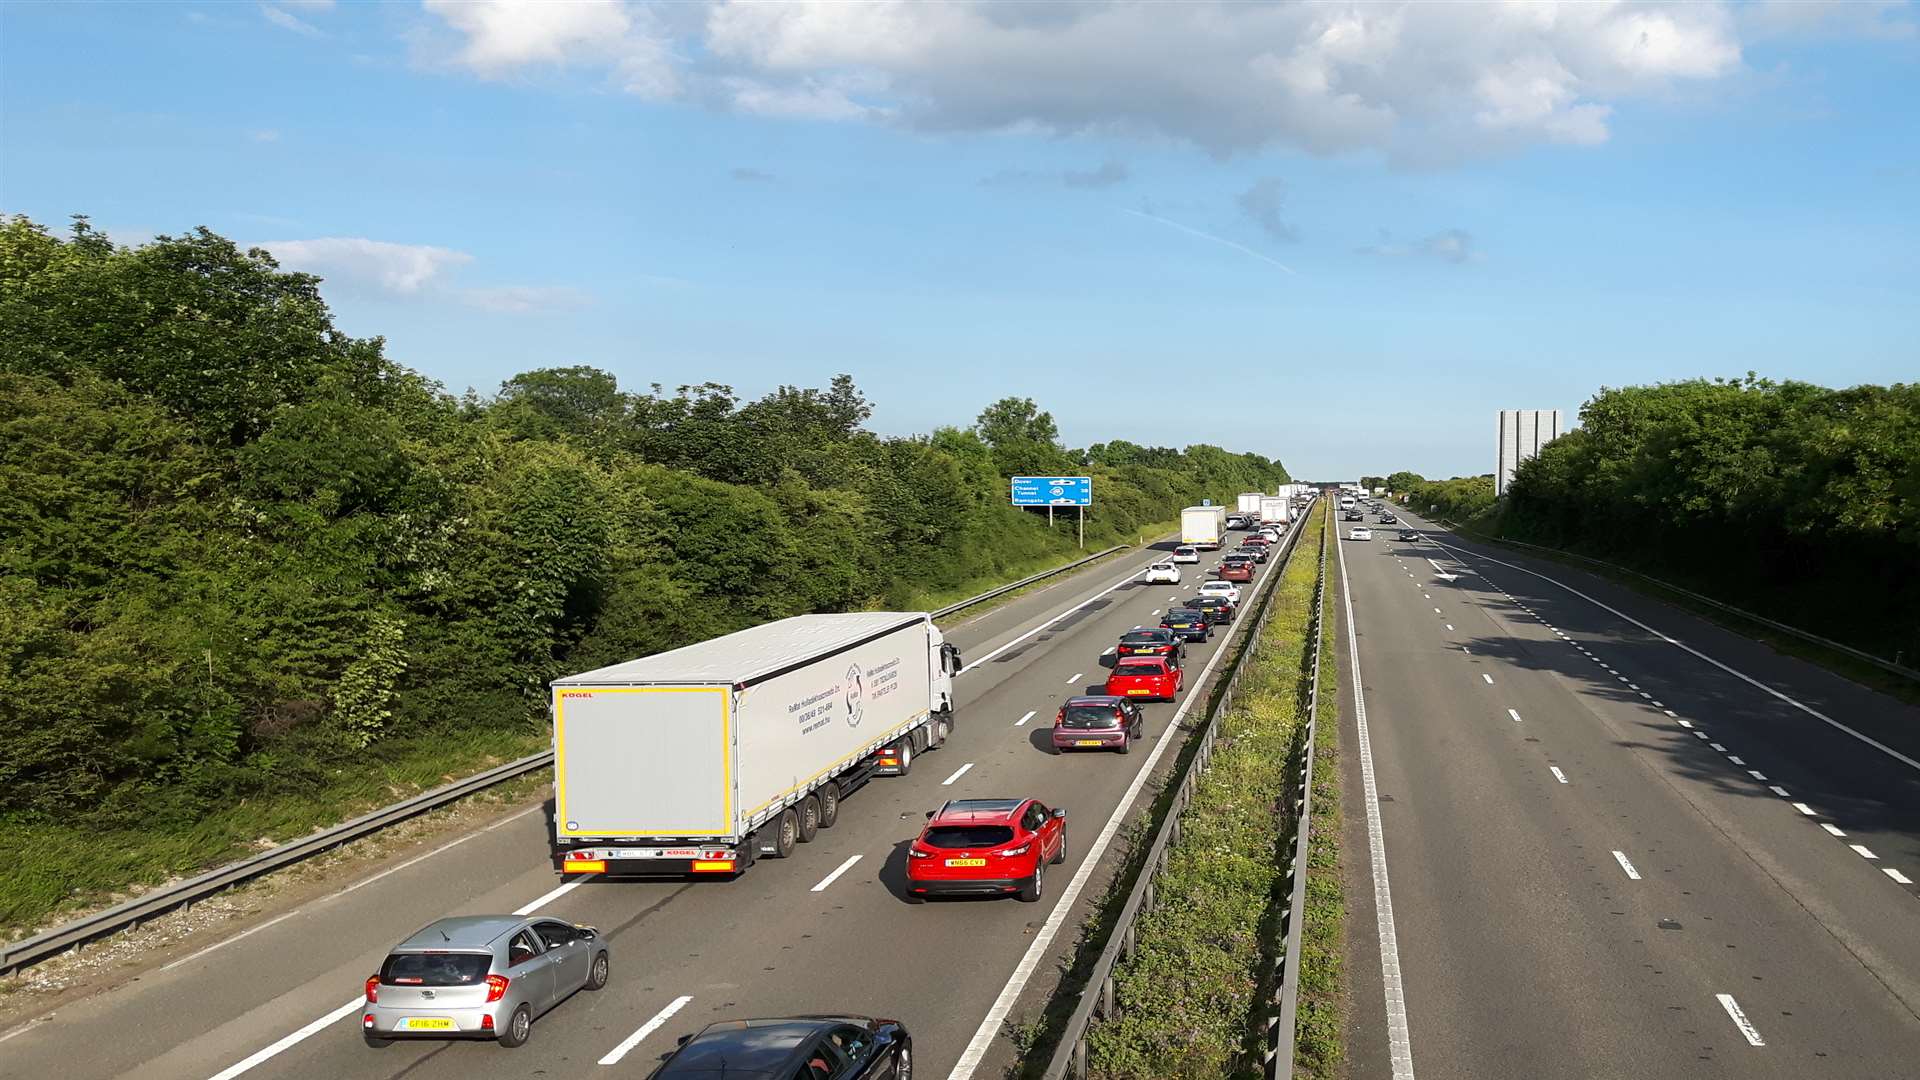 Traffic queuing on the M2 coastbound from junction 5 at Stockbury